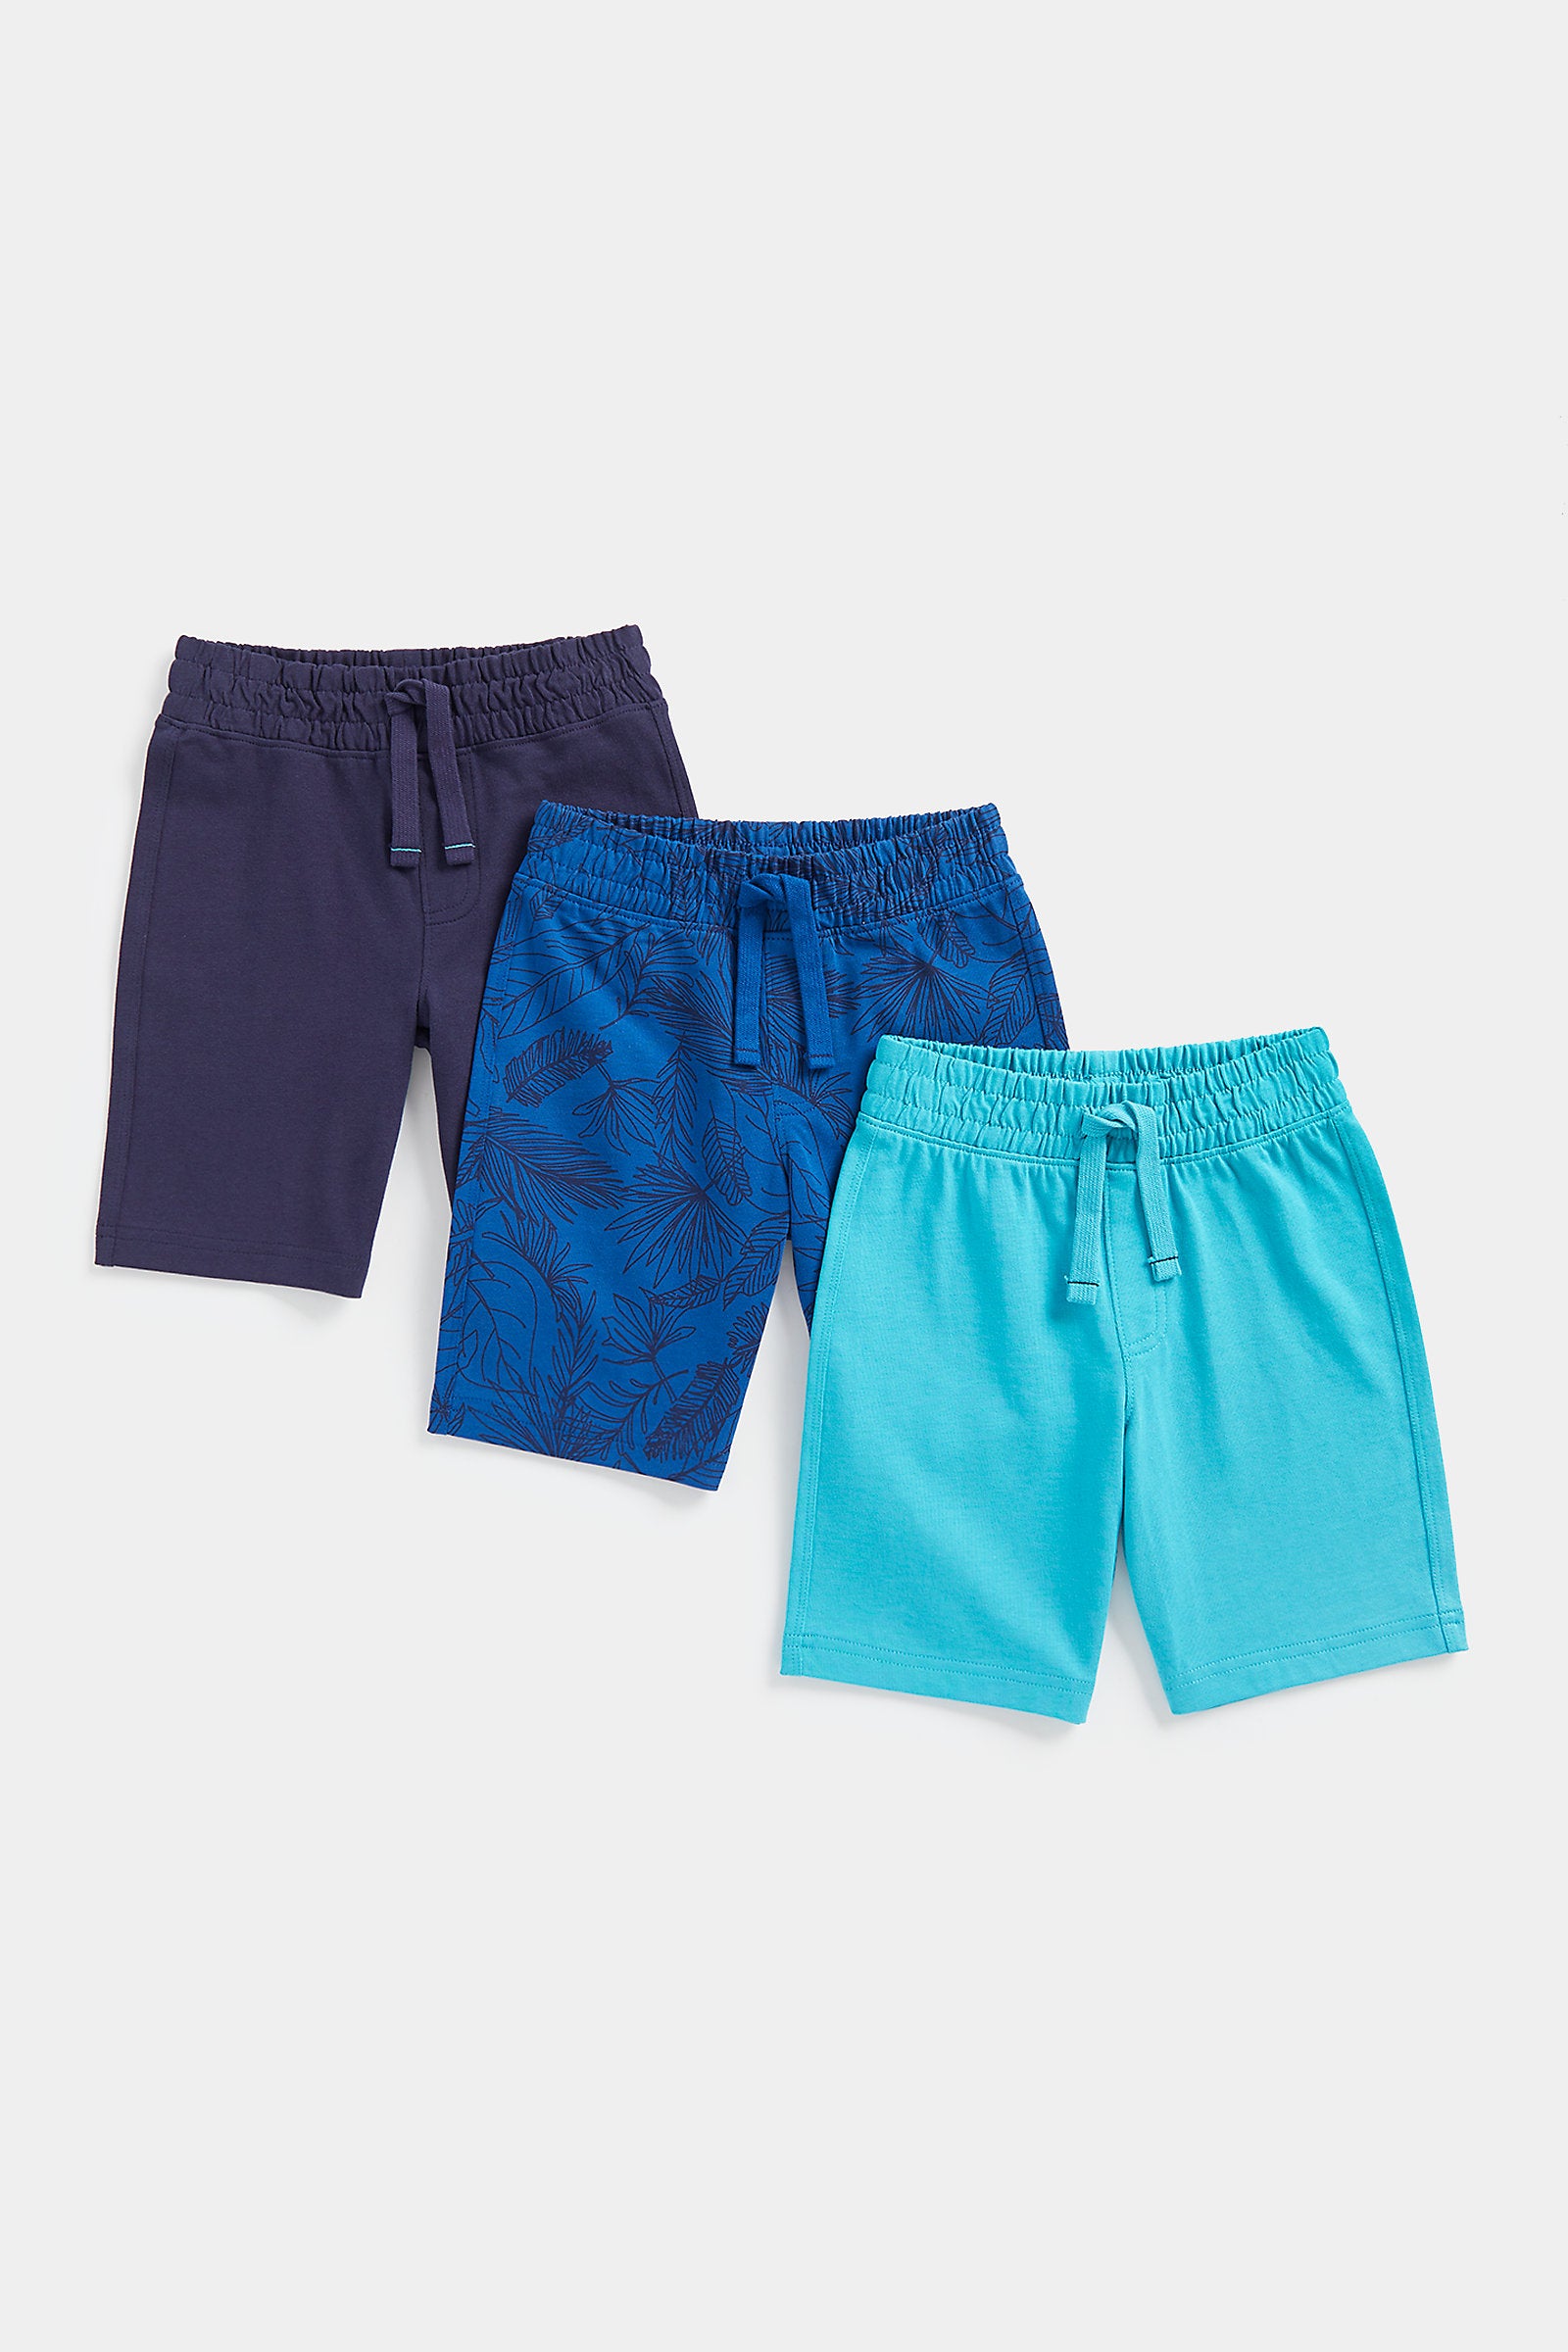 Jersey Shorts - 3 Pack